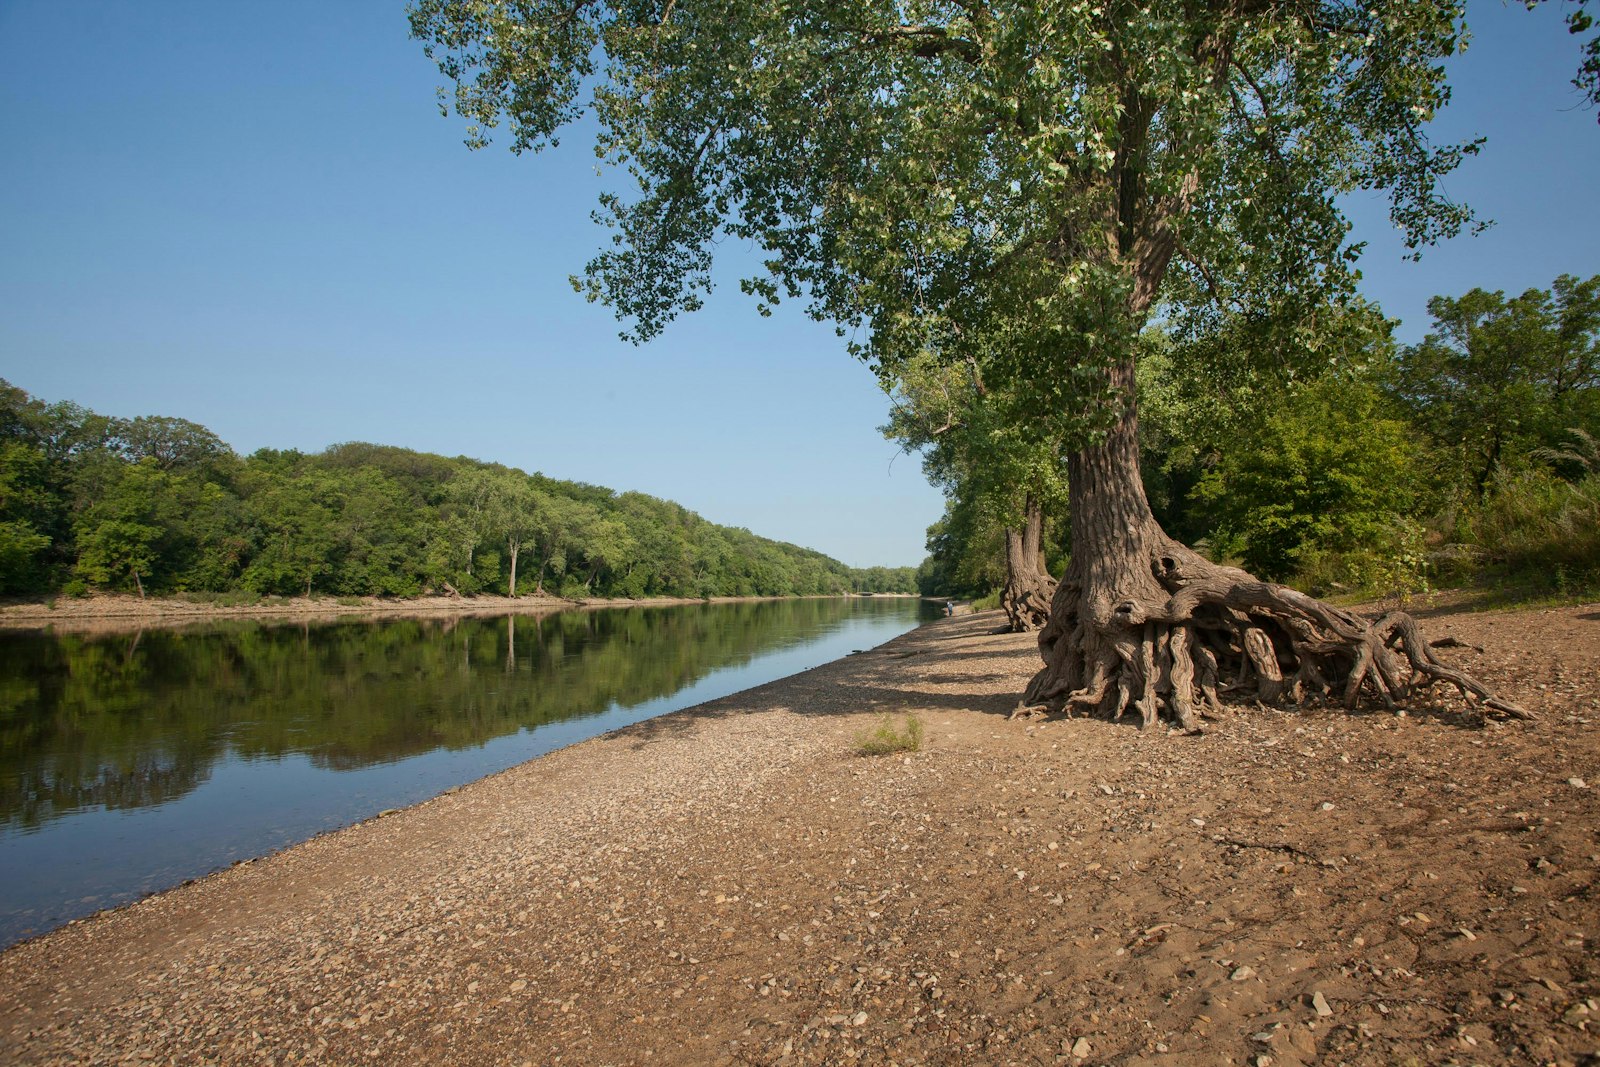 A tree on the bank of a river